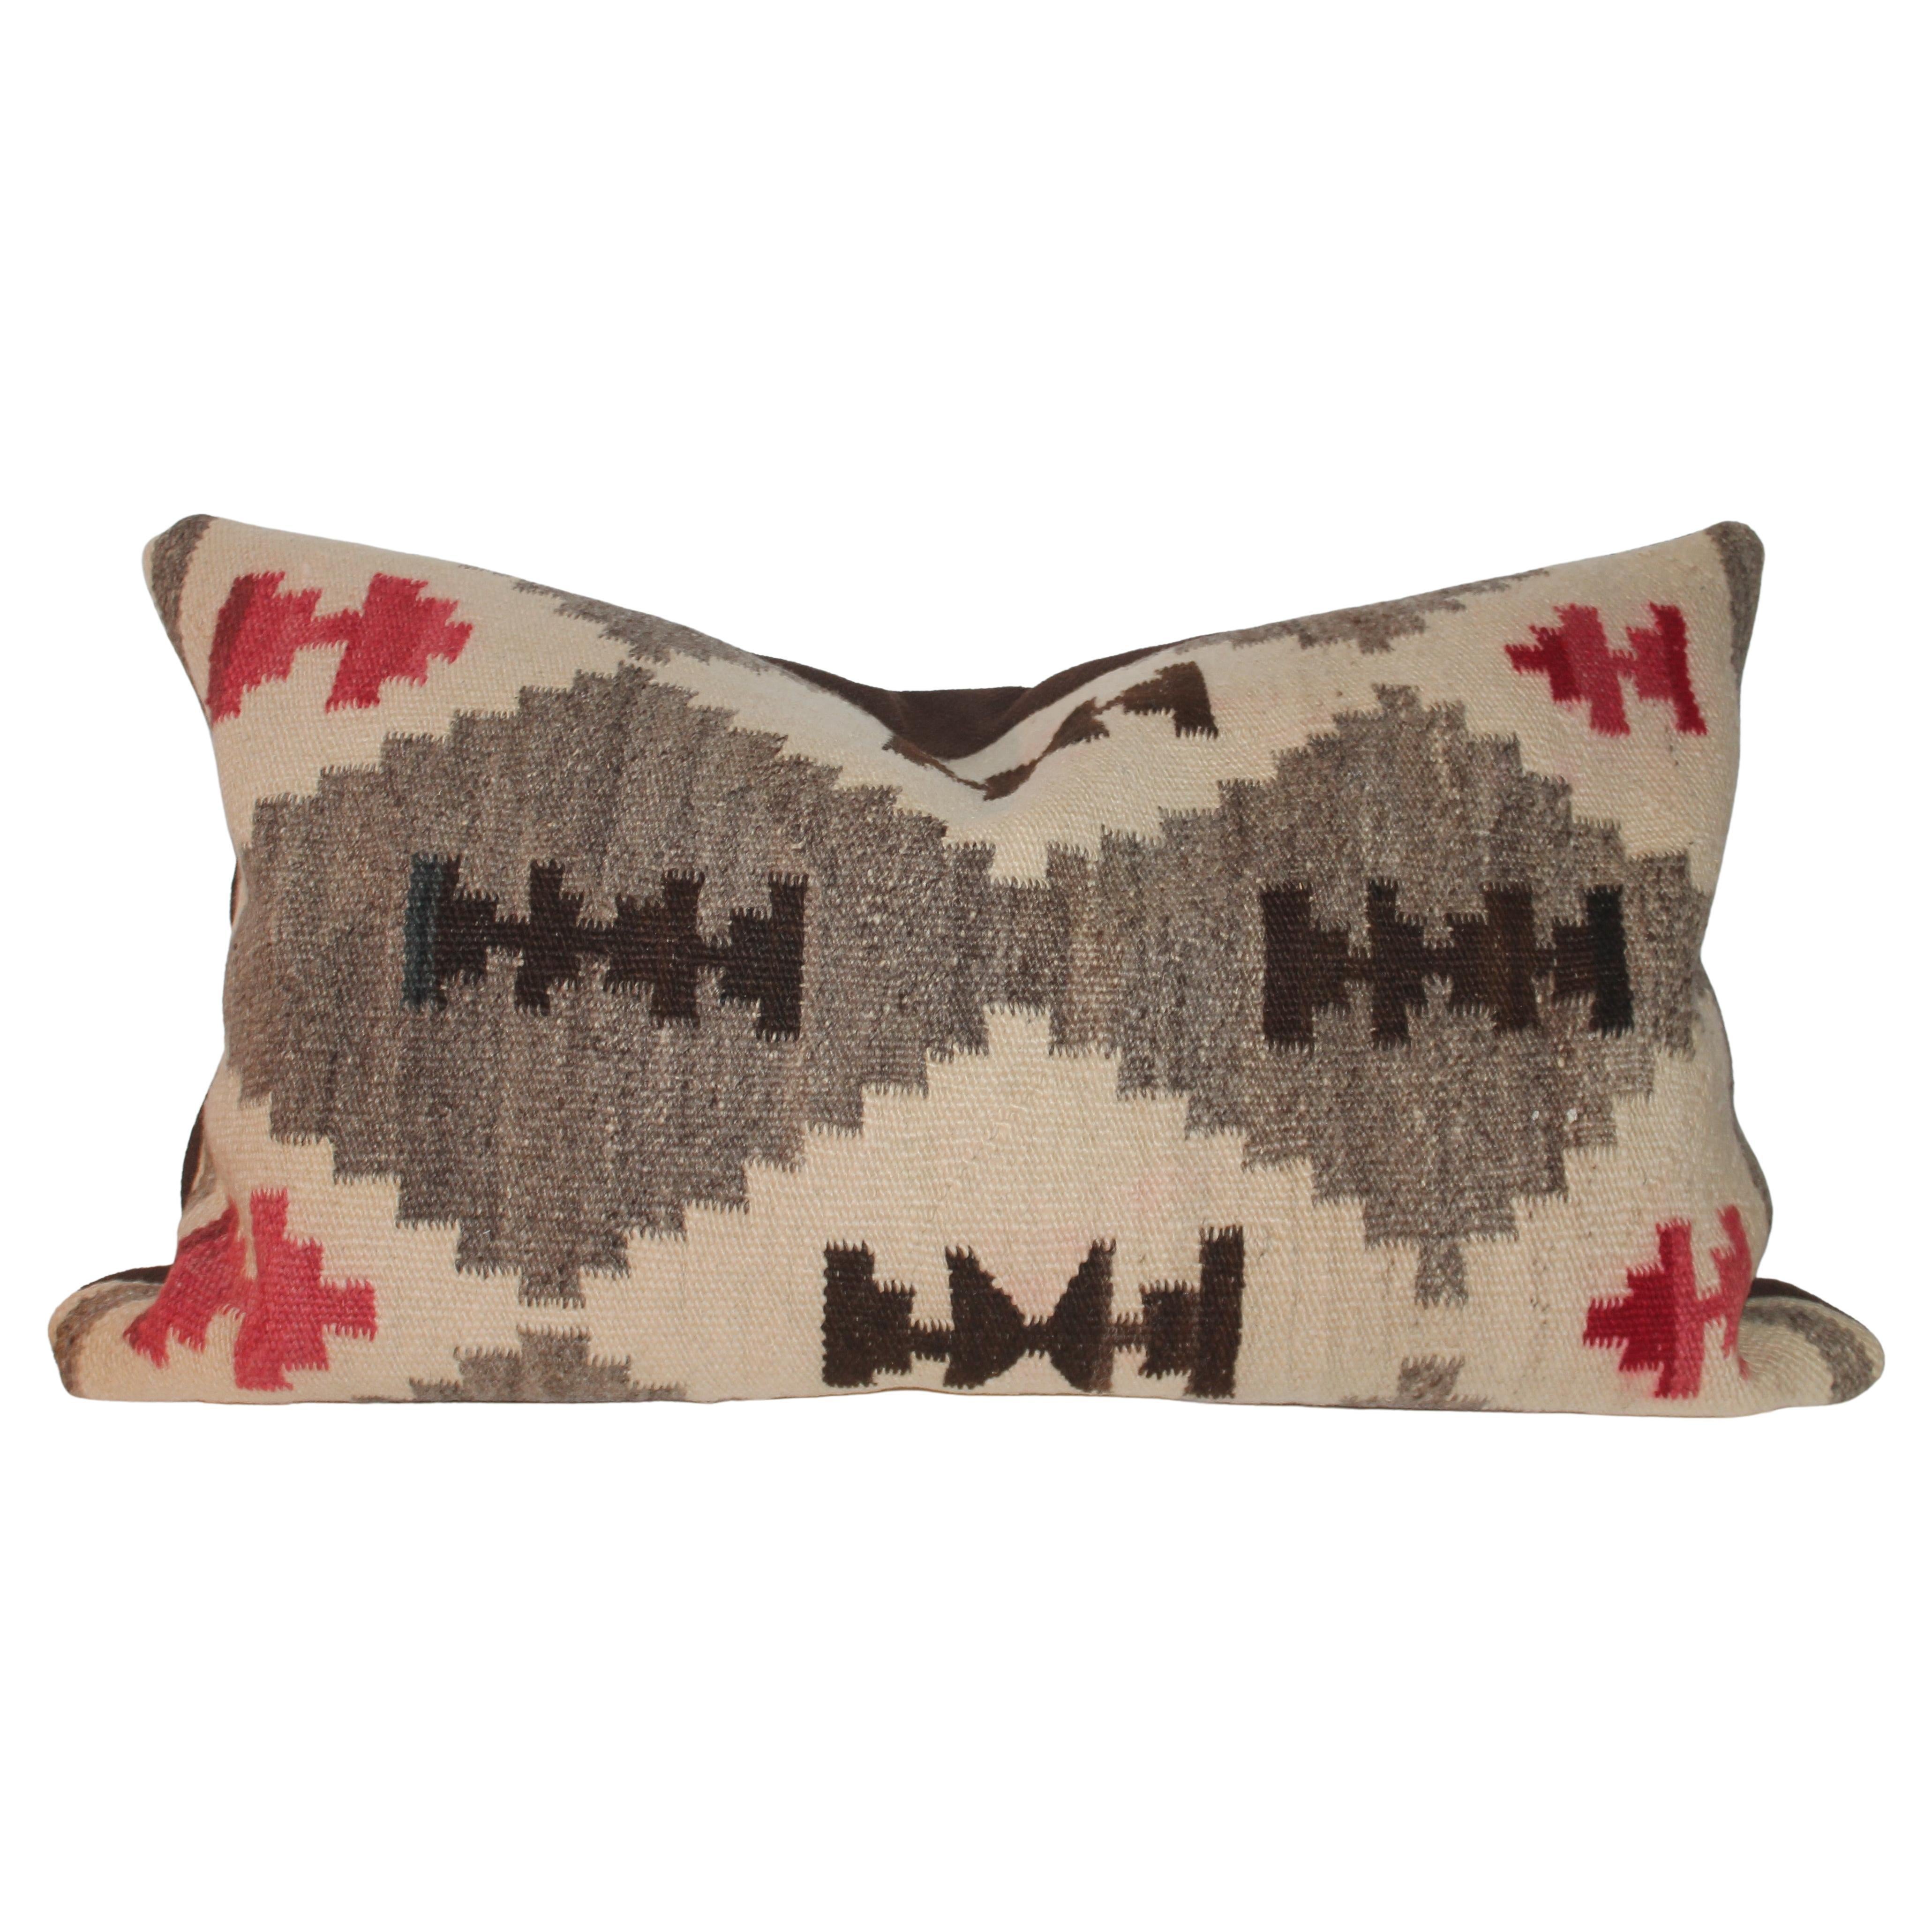 Early 20thc Navajo Indian Weaving Pillow For Sale